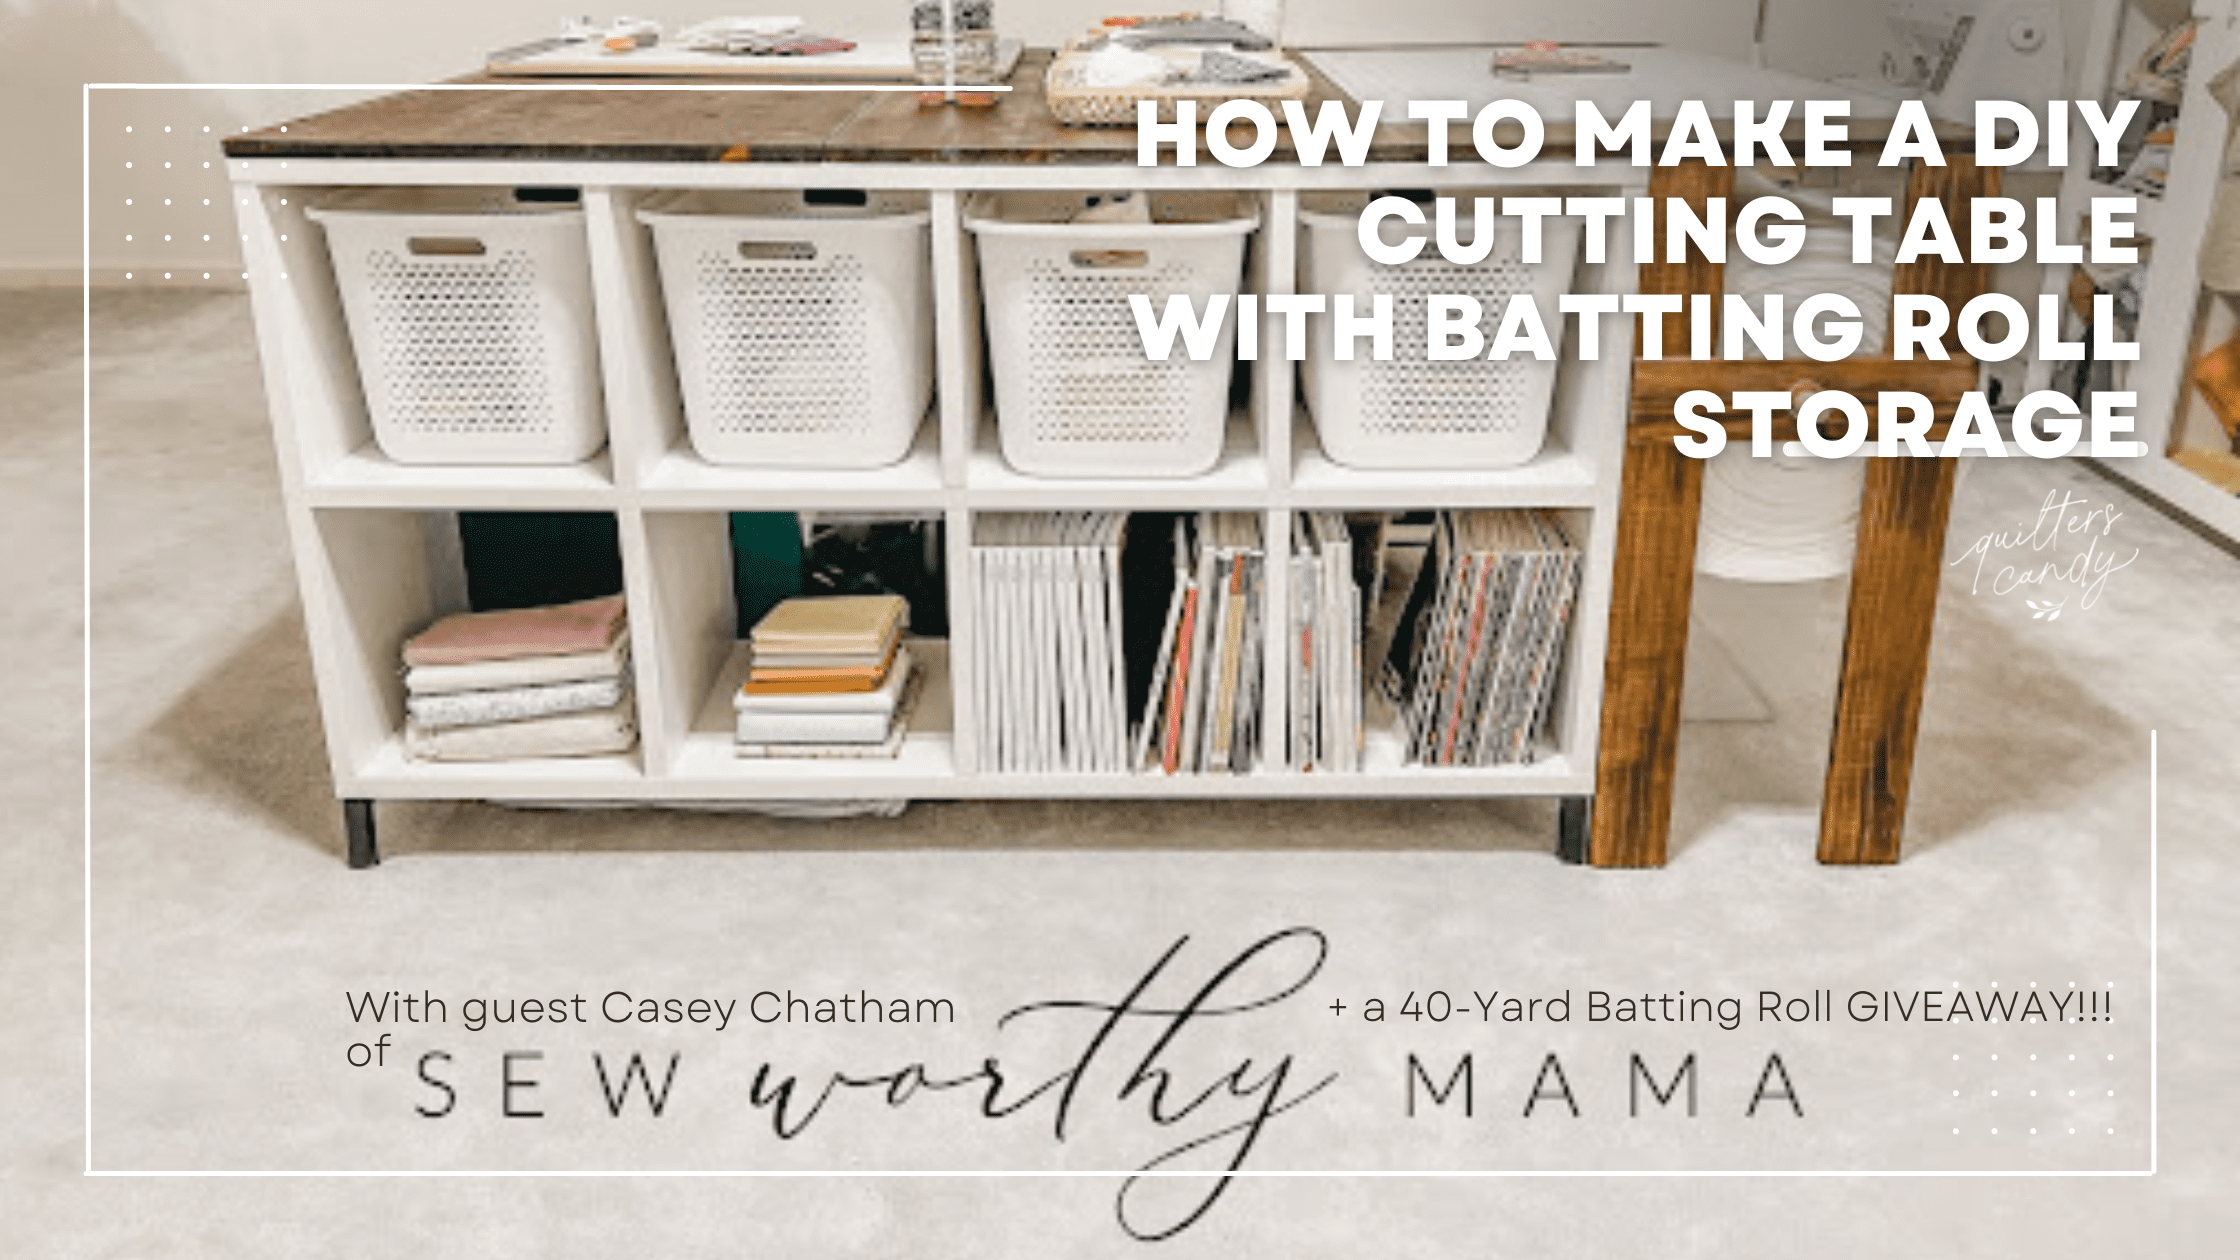 How to Make a DIY Cutting Table with Batting Roll Storage